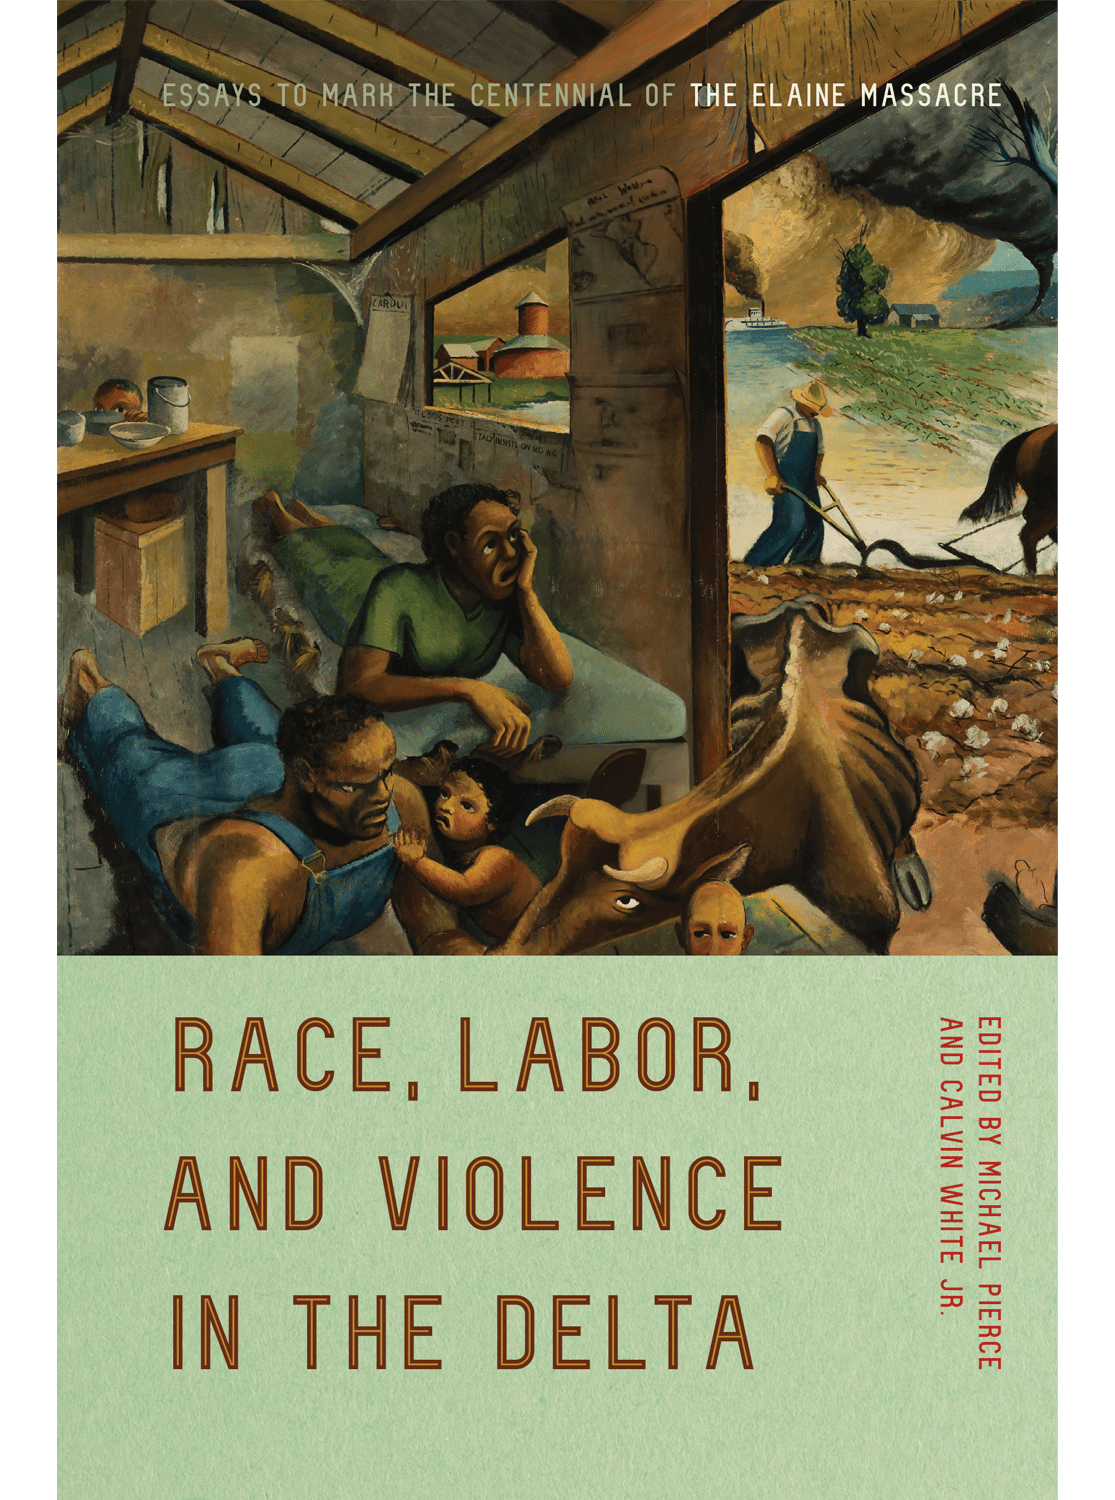 Race labor and violence in the delta book cover